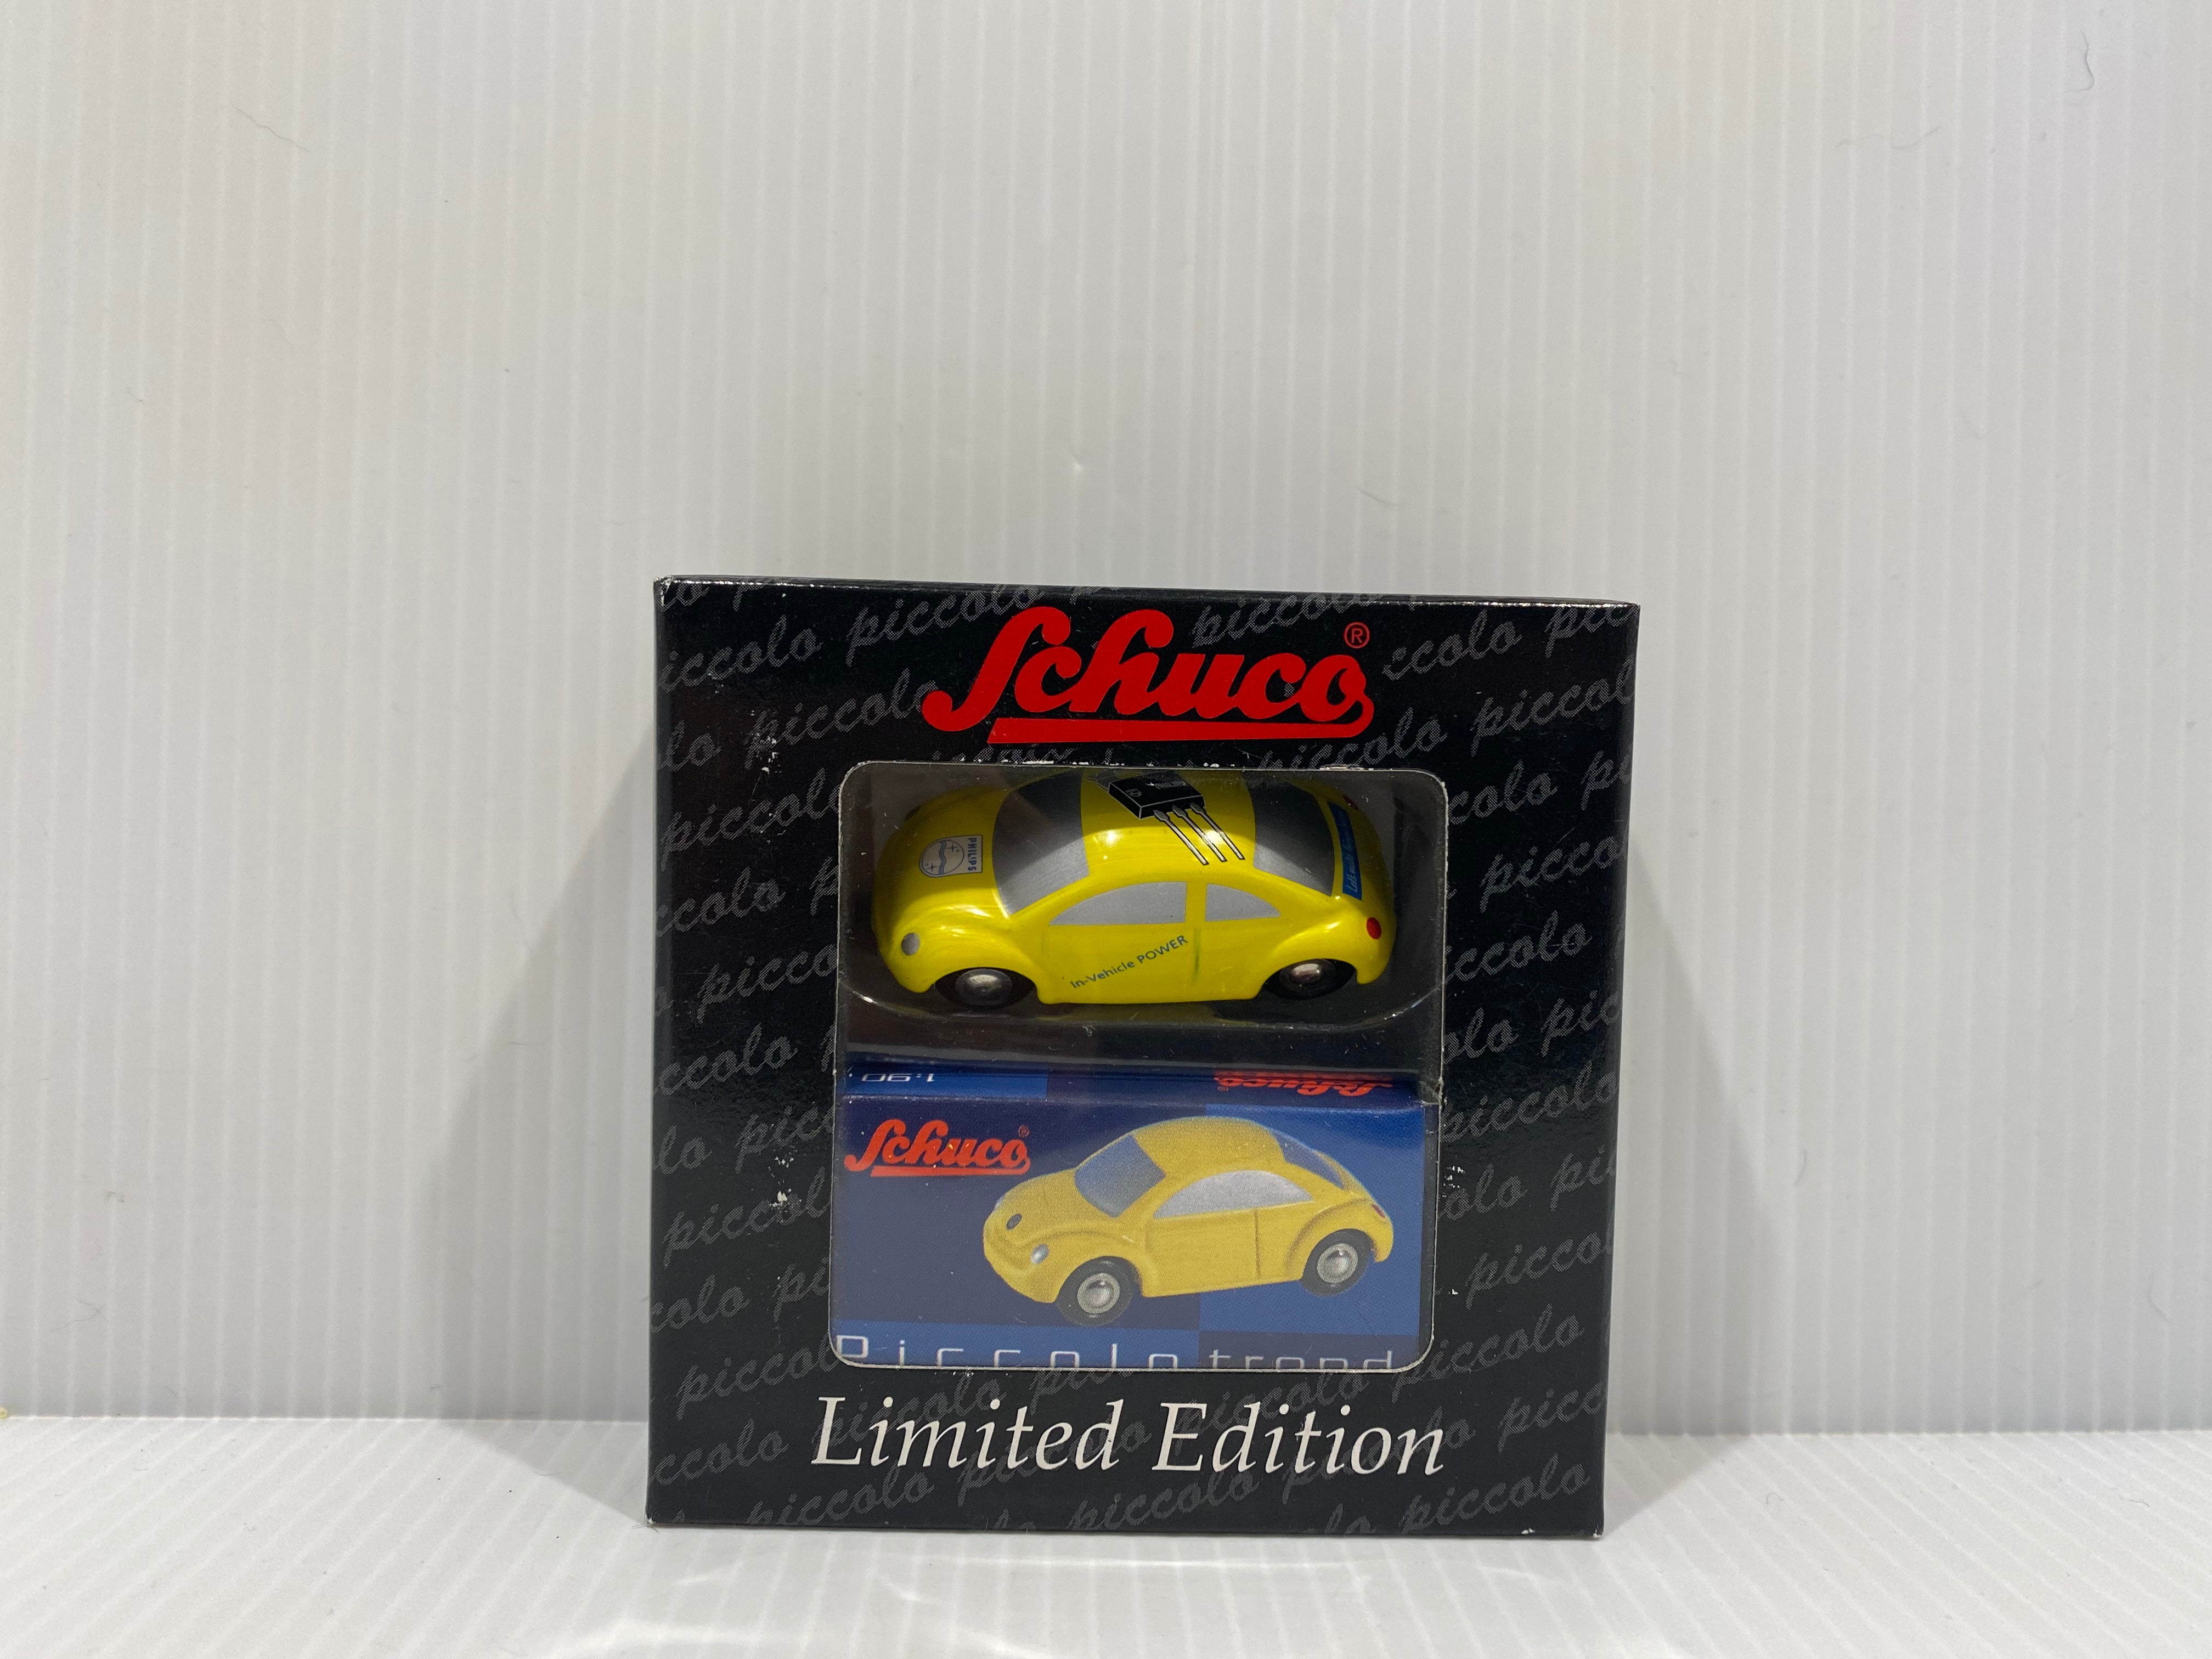 Schuco Piccolo VW Beetle "Philips" Vehicle. Limited Edition